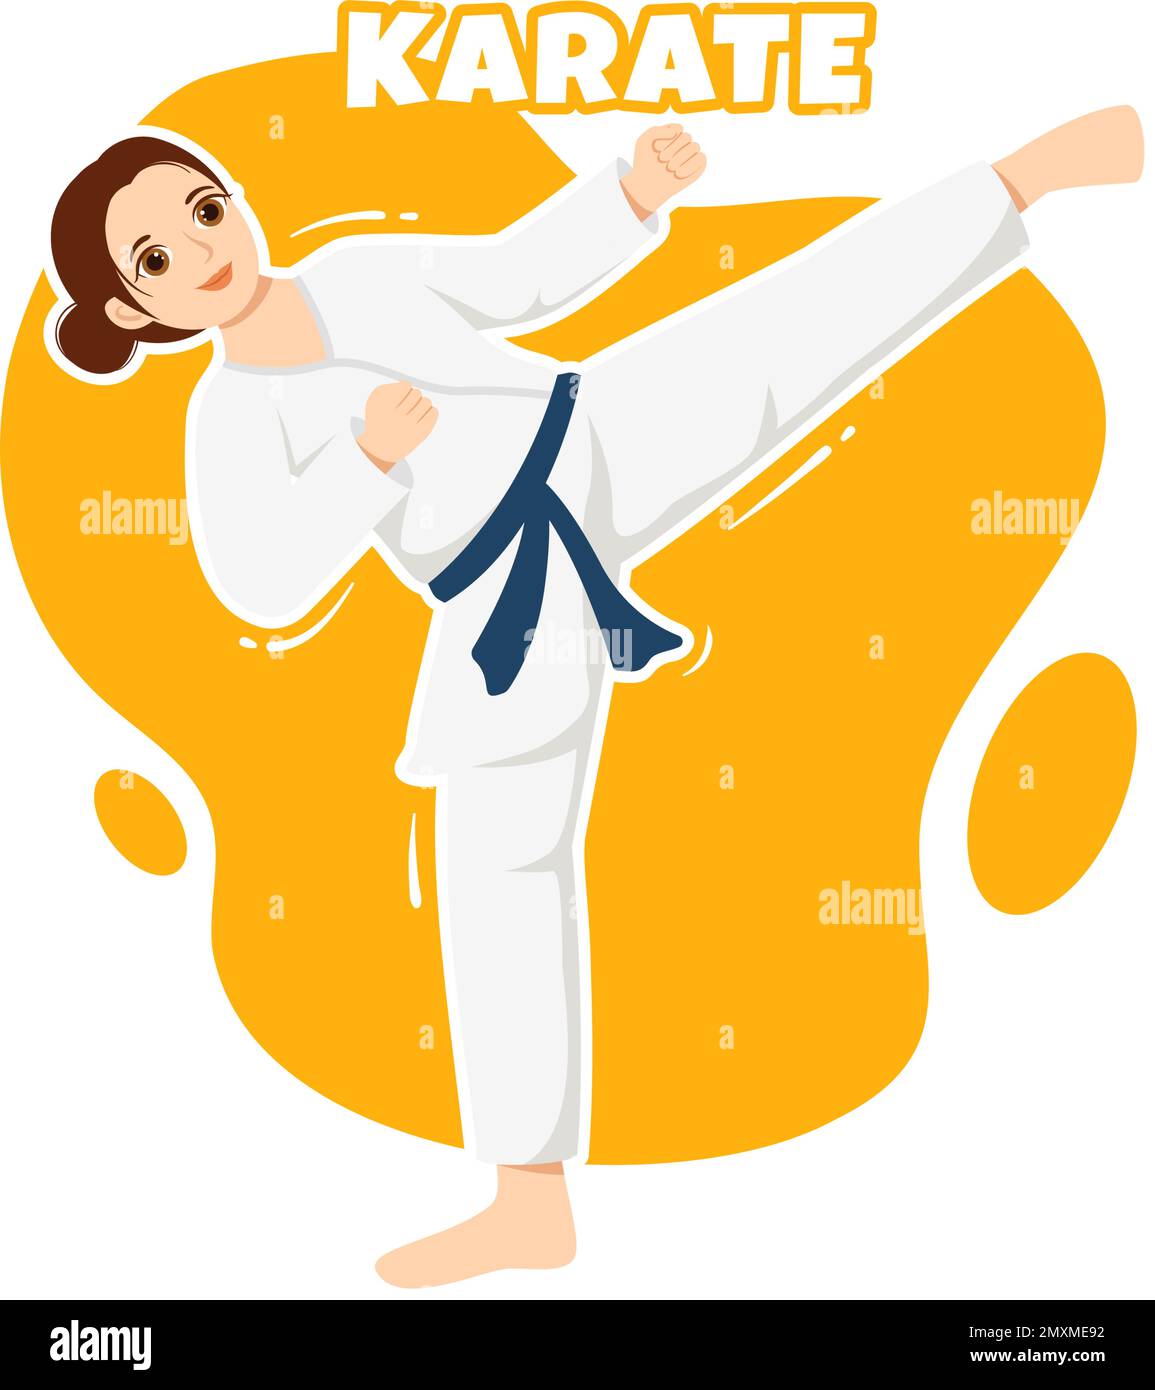 People Doing Some Basic Karate Martial Arts Moves, Fighting Pose and Wearing Kimono in Cartoon Hand Drawn for Landing Page Templates Illustration Stock Vector